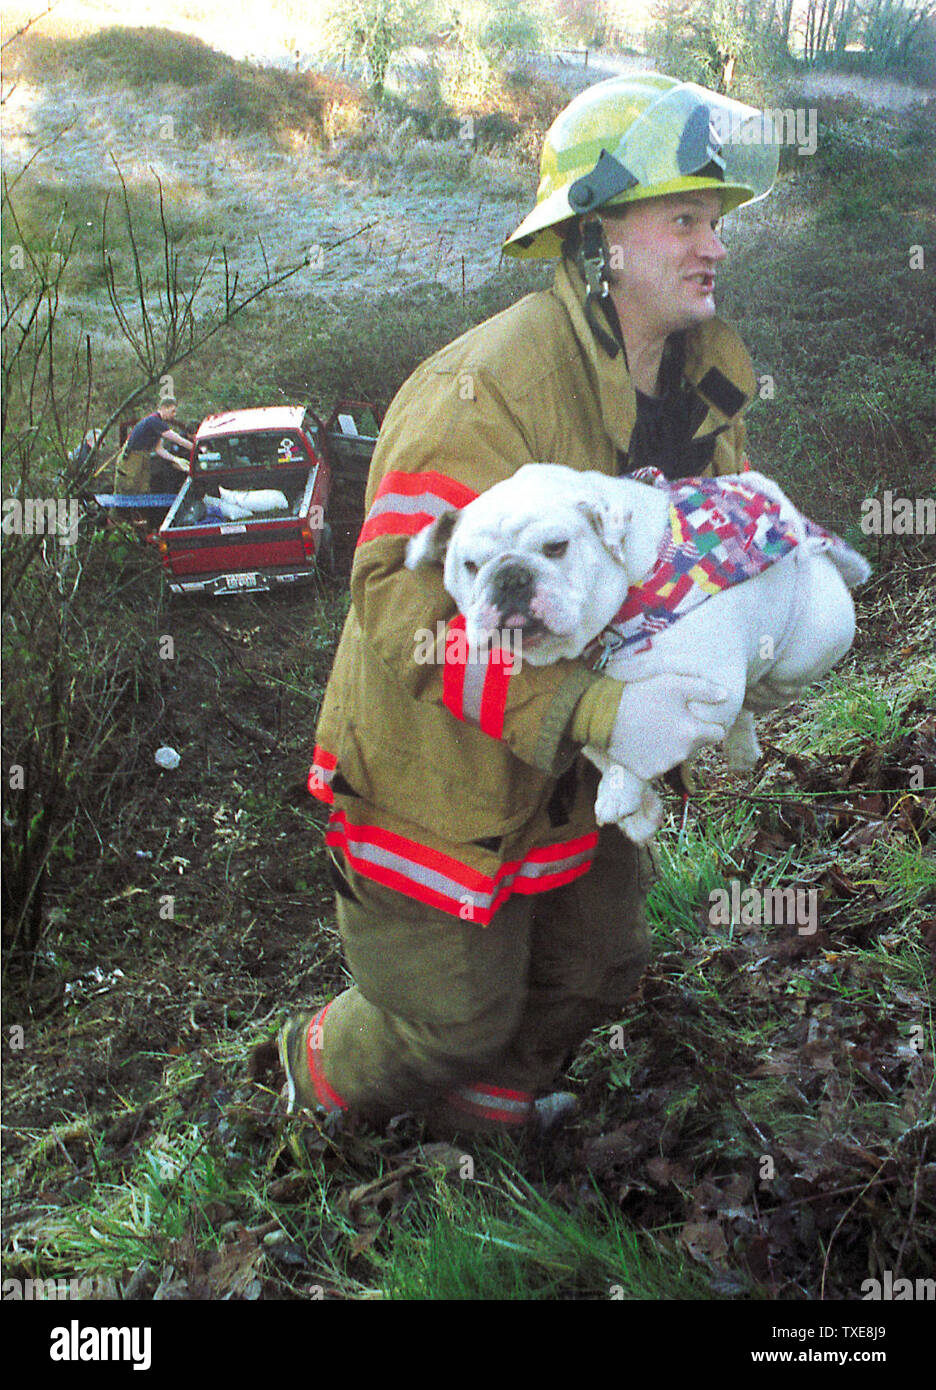 POY2000121205 - BEST OF 2000 18 JANUARY 2000 - SEATTLE, WASHINGTON ,USA: Randy Eaton, of the Kitsap Peninsula District 7 fire department, carries a 50 plus pound bulldog up a Long Lake Road hillside.  The dog's owner reportedly lost control of his truck while passing another motorist on the icy road  January 18, 2000. The dog was fine, but his master was taken to Harrison Memorial Hospital for possible back injuries.   bc/jb/Jim Bryant     UPI Stock Photo